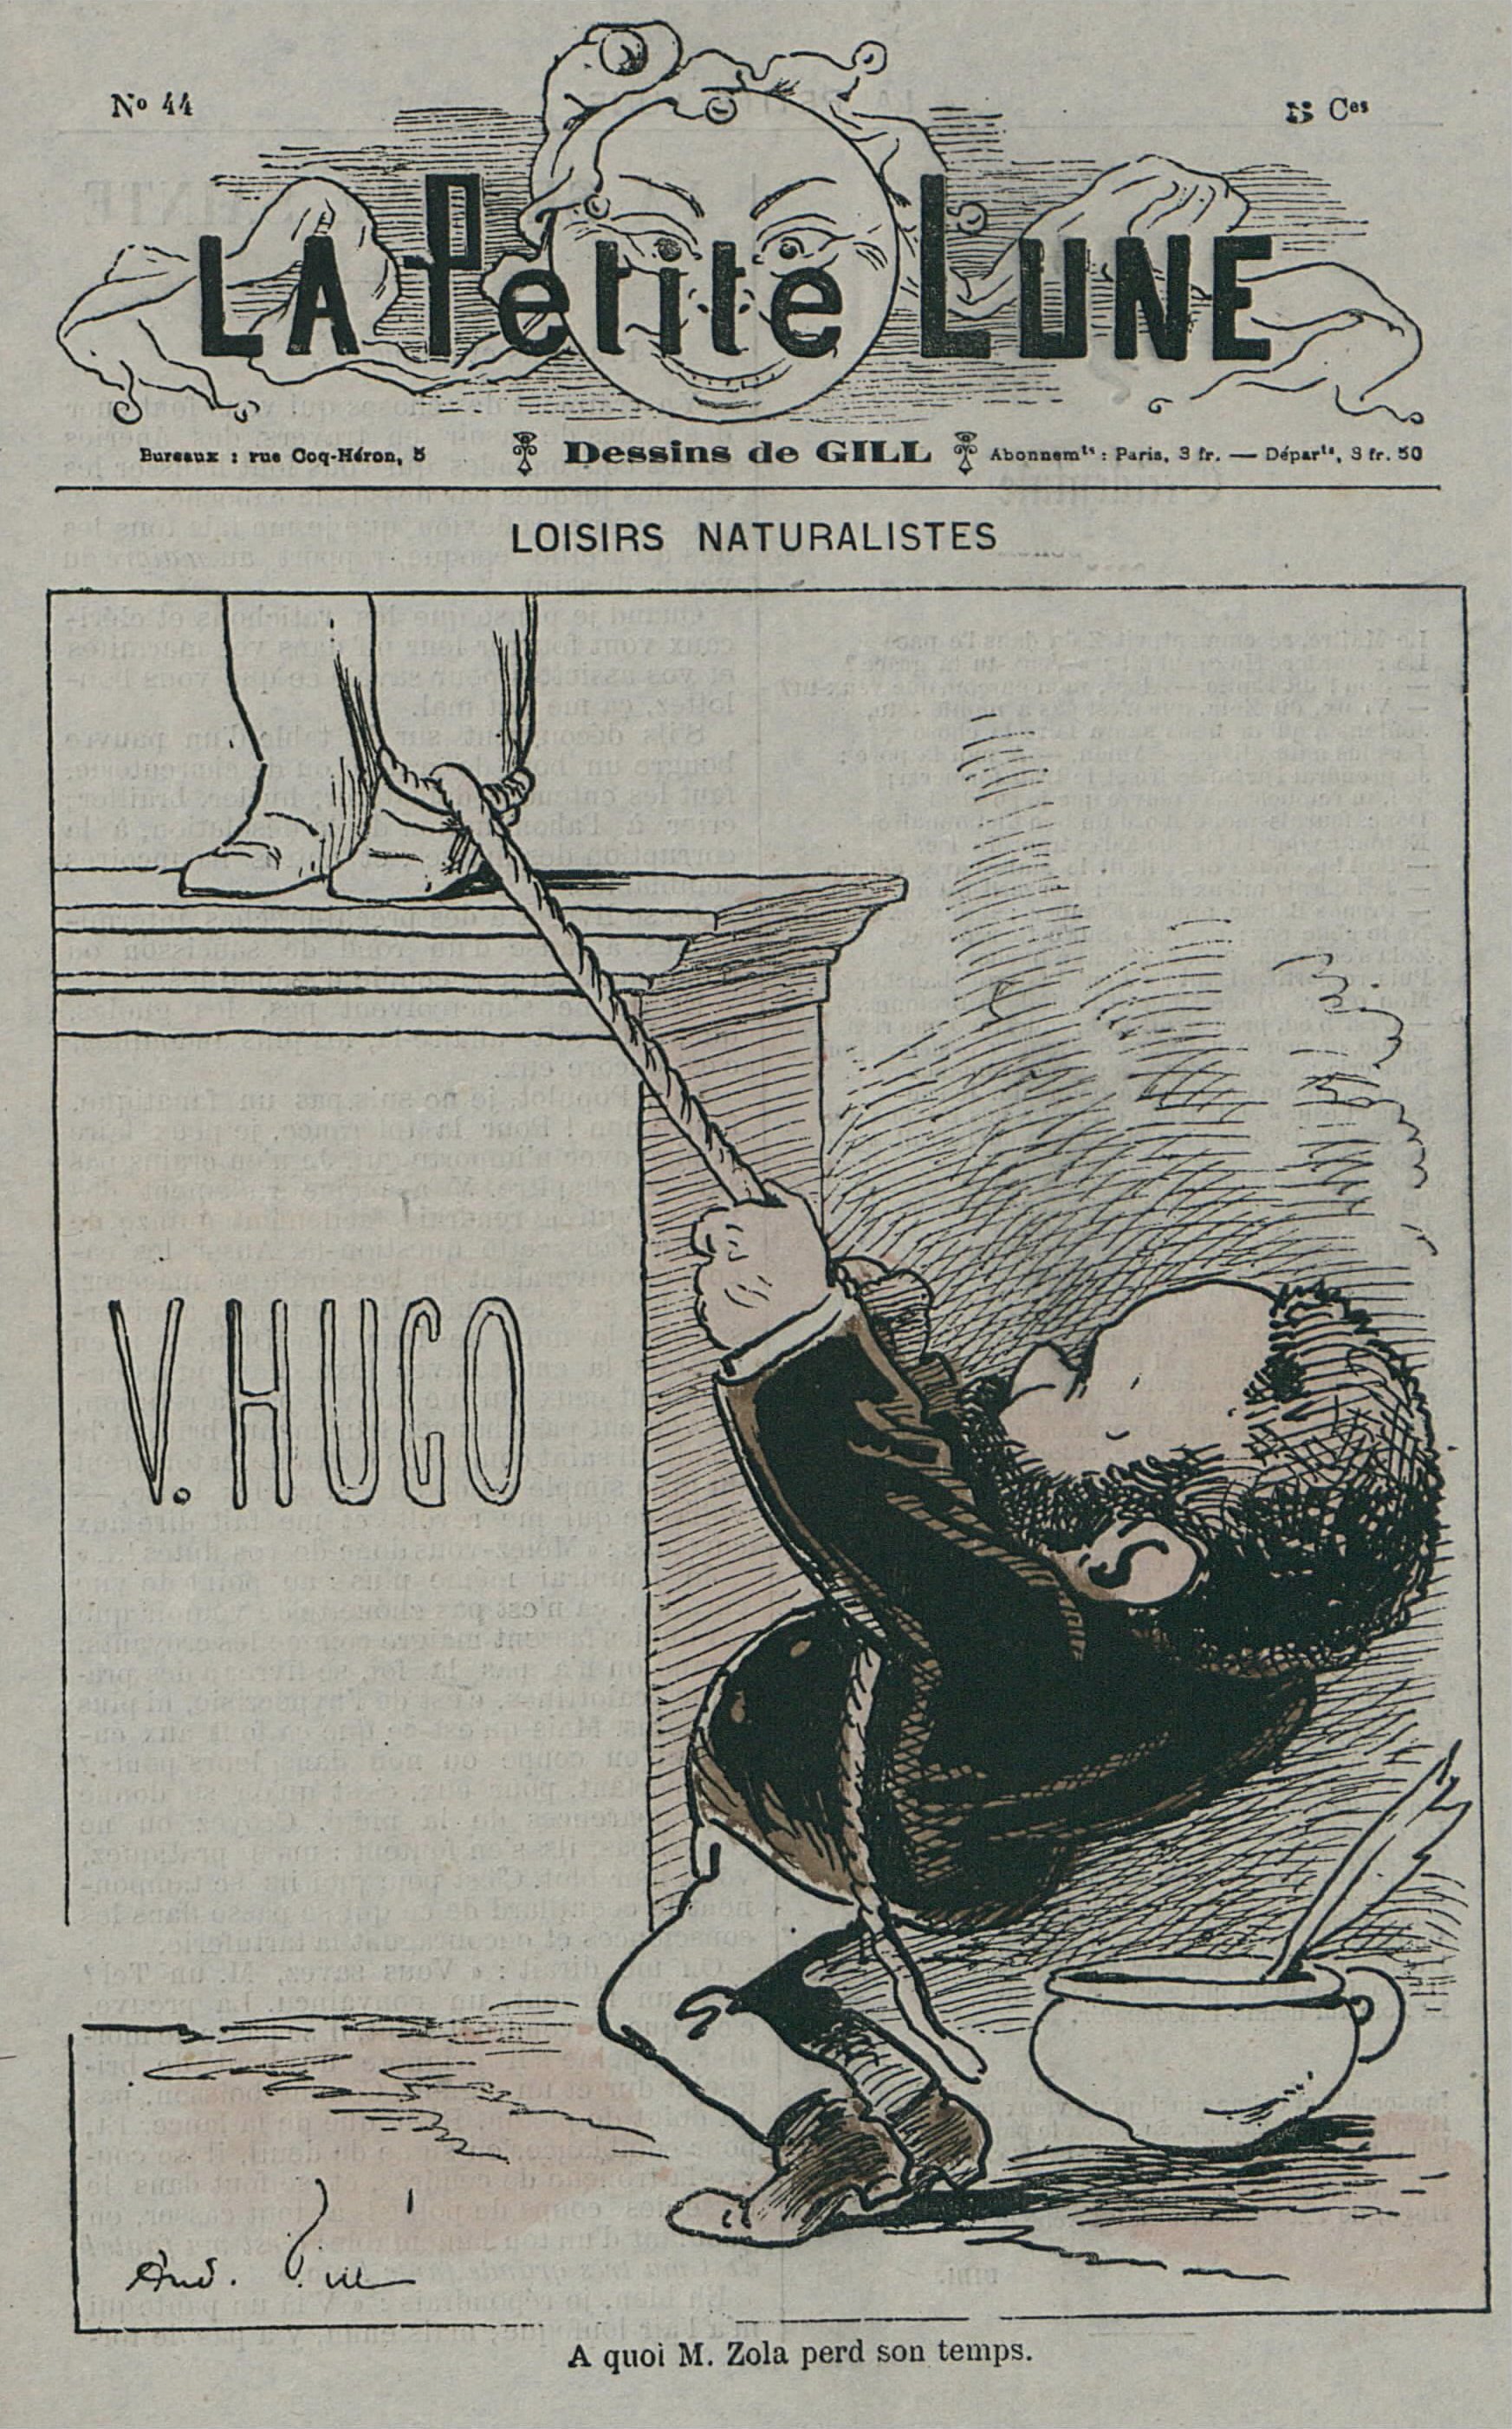 Cariacature showing young Zola trying to pull Hugo off his pedestal. (1879)